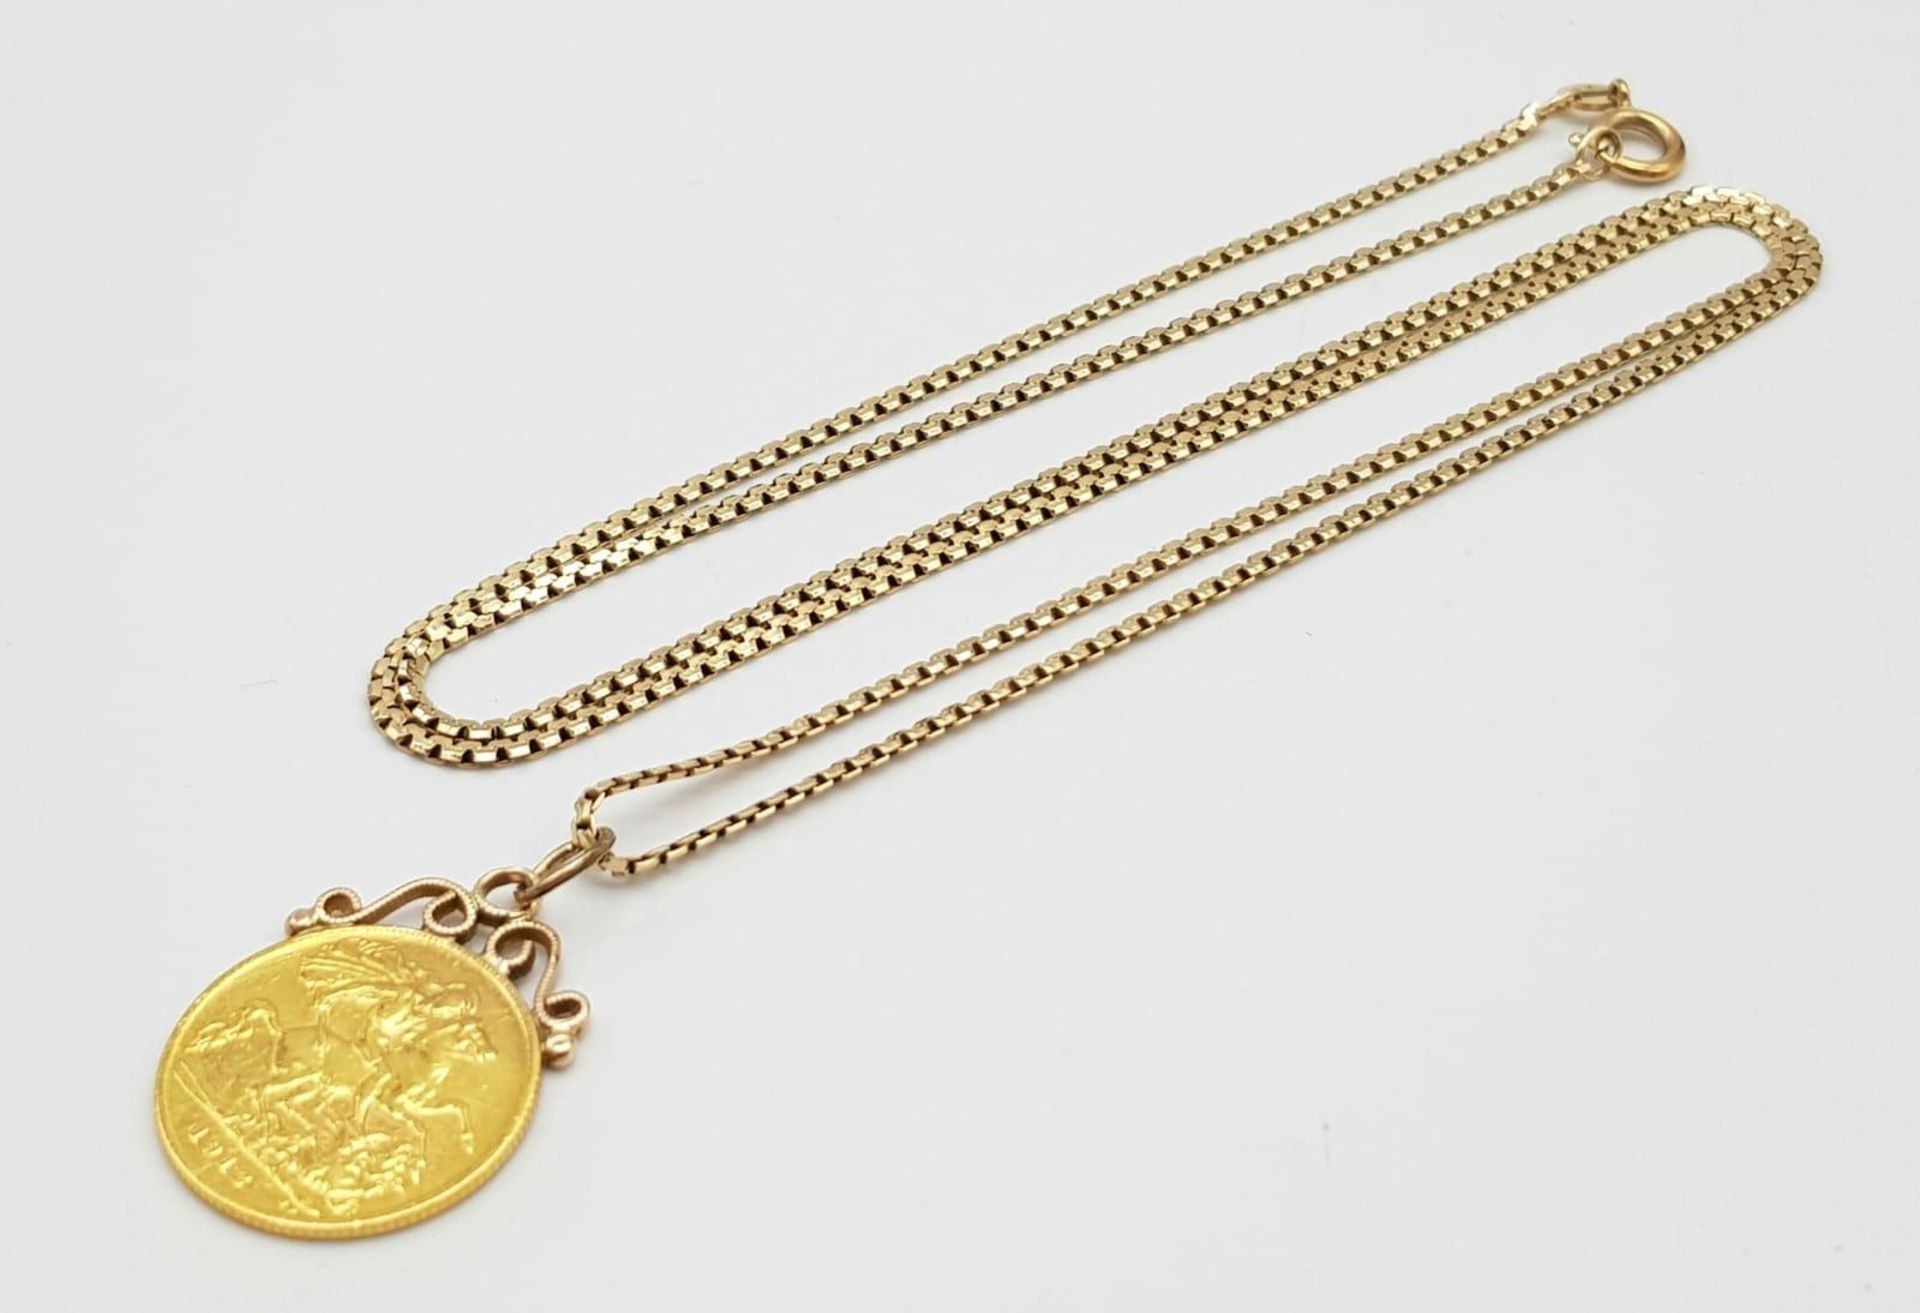 A 22K GOLD HALF SOVEREIGN MOUNTED IN 9K GOLD AND ON A 60cms 9K GOLD BOXLINK CHAIN . 10.4gms - Image 2 of 7